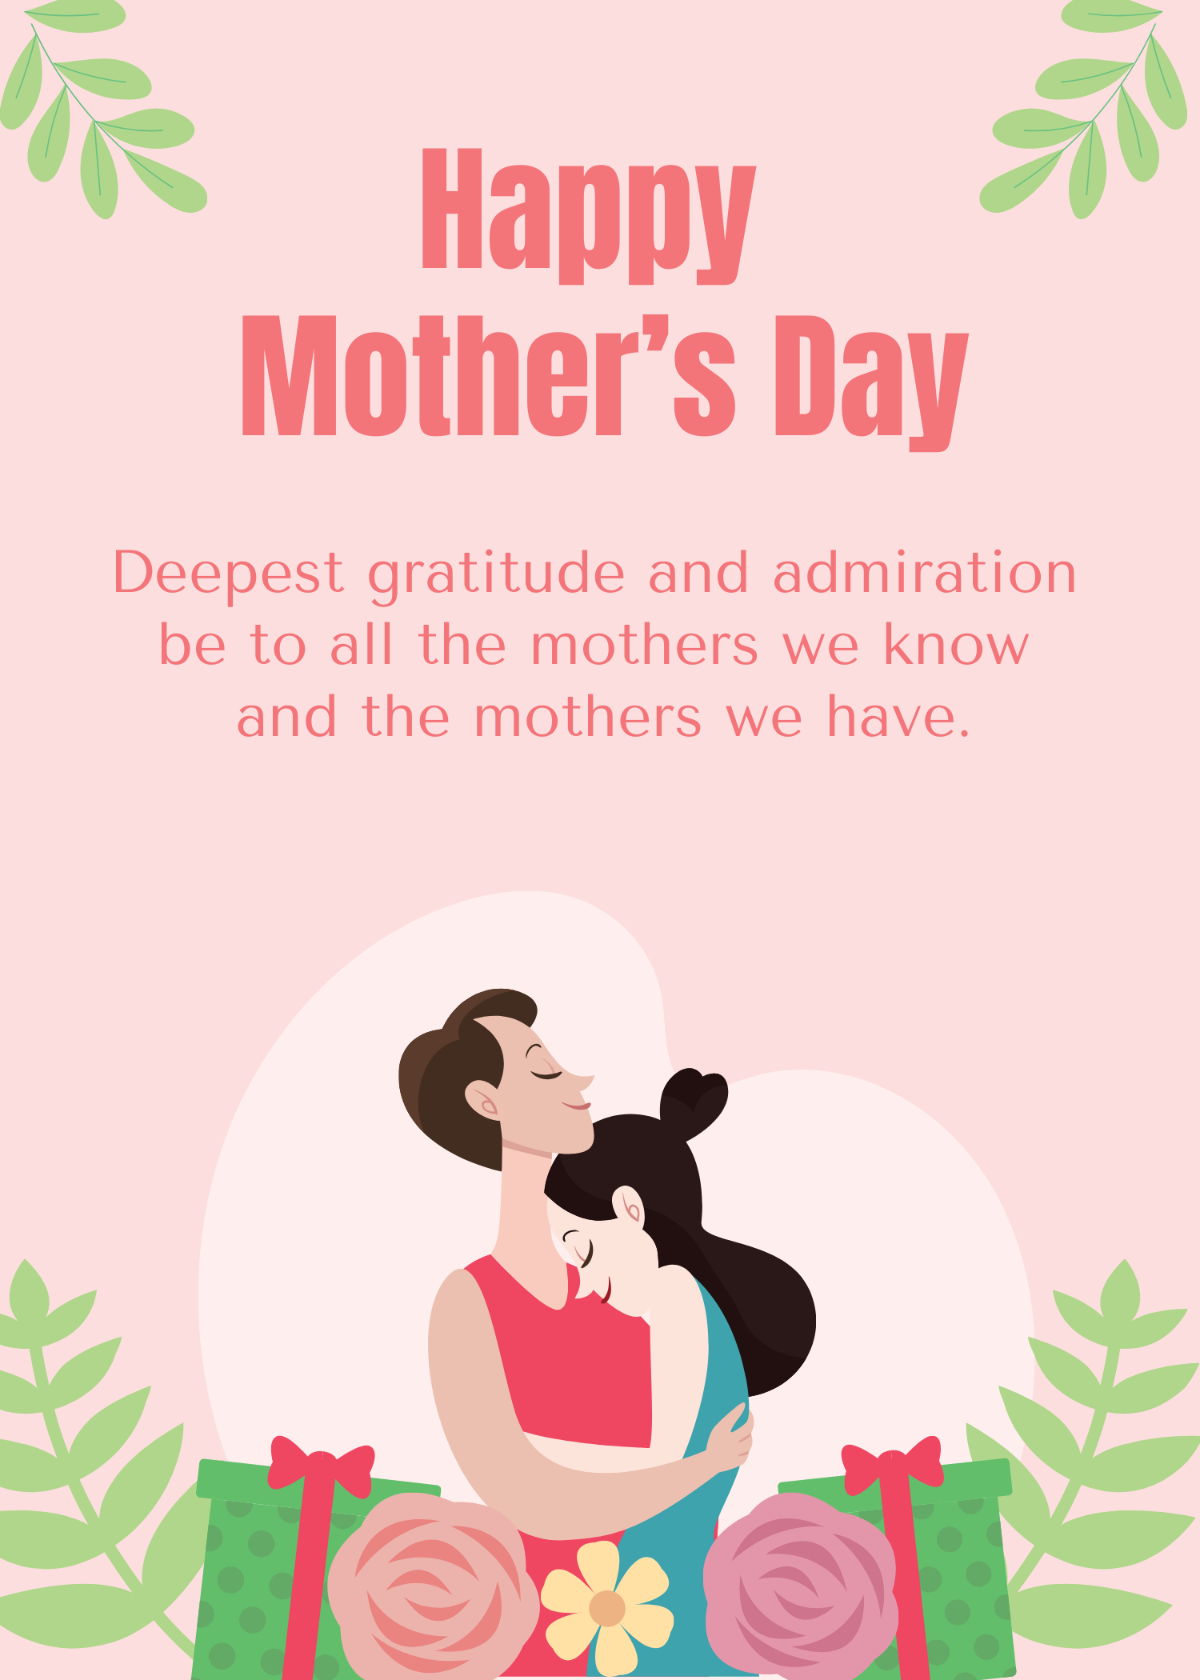 Free Mother's Day Greeting Card Template